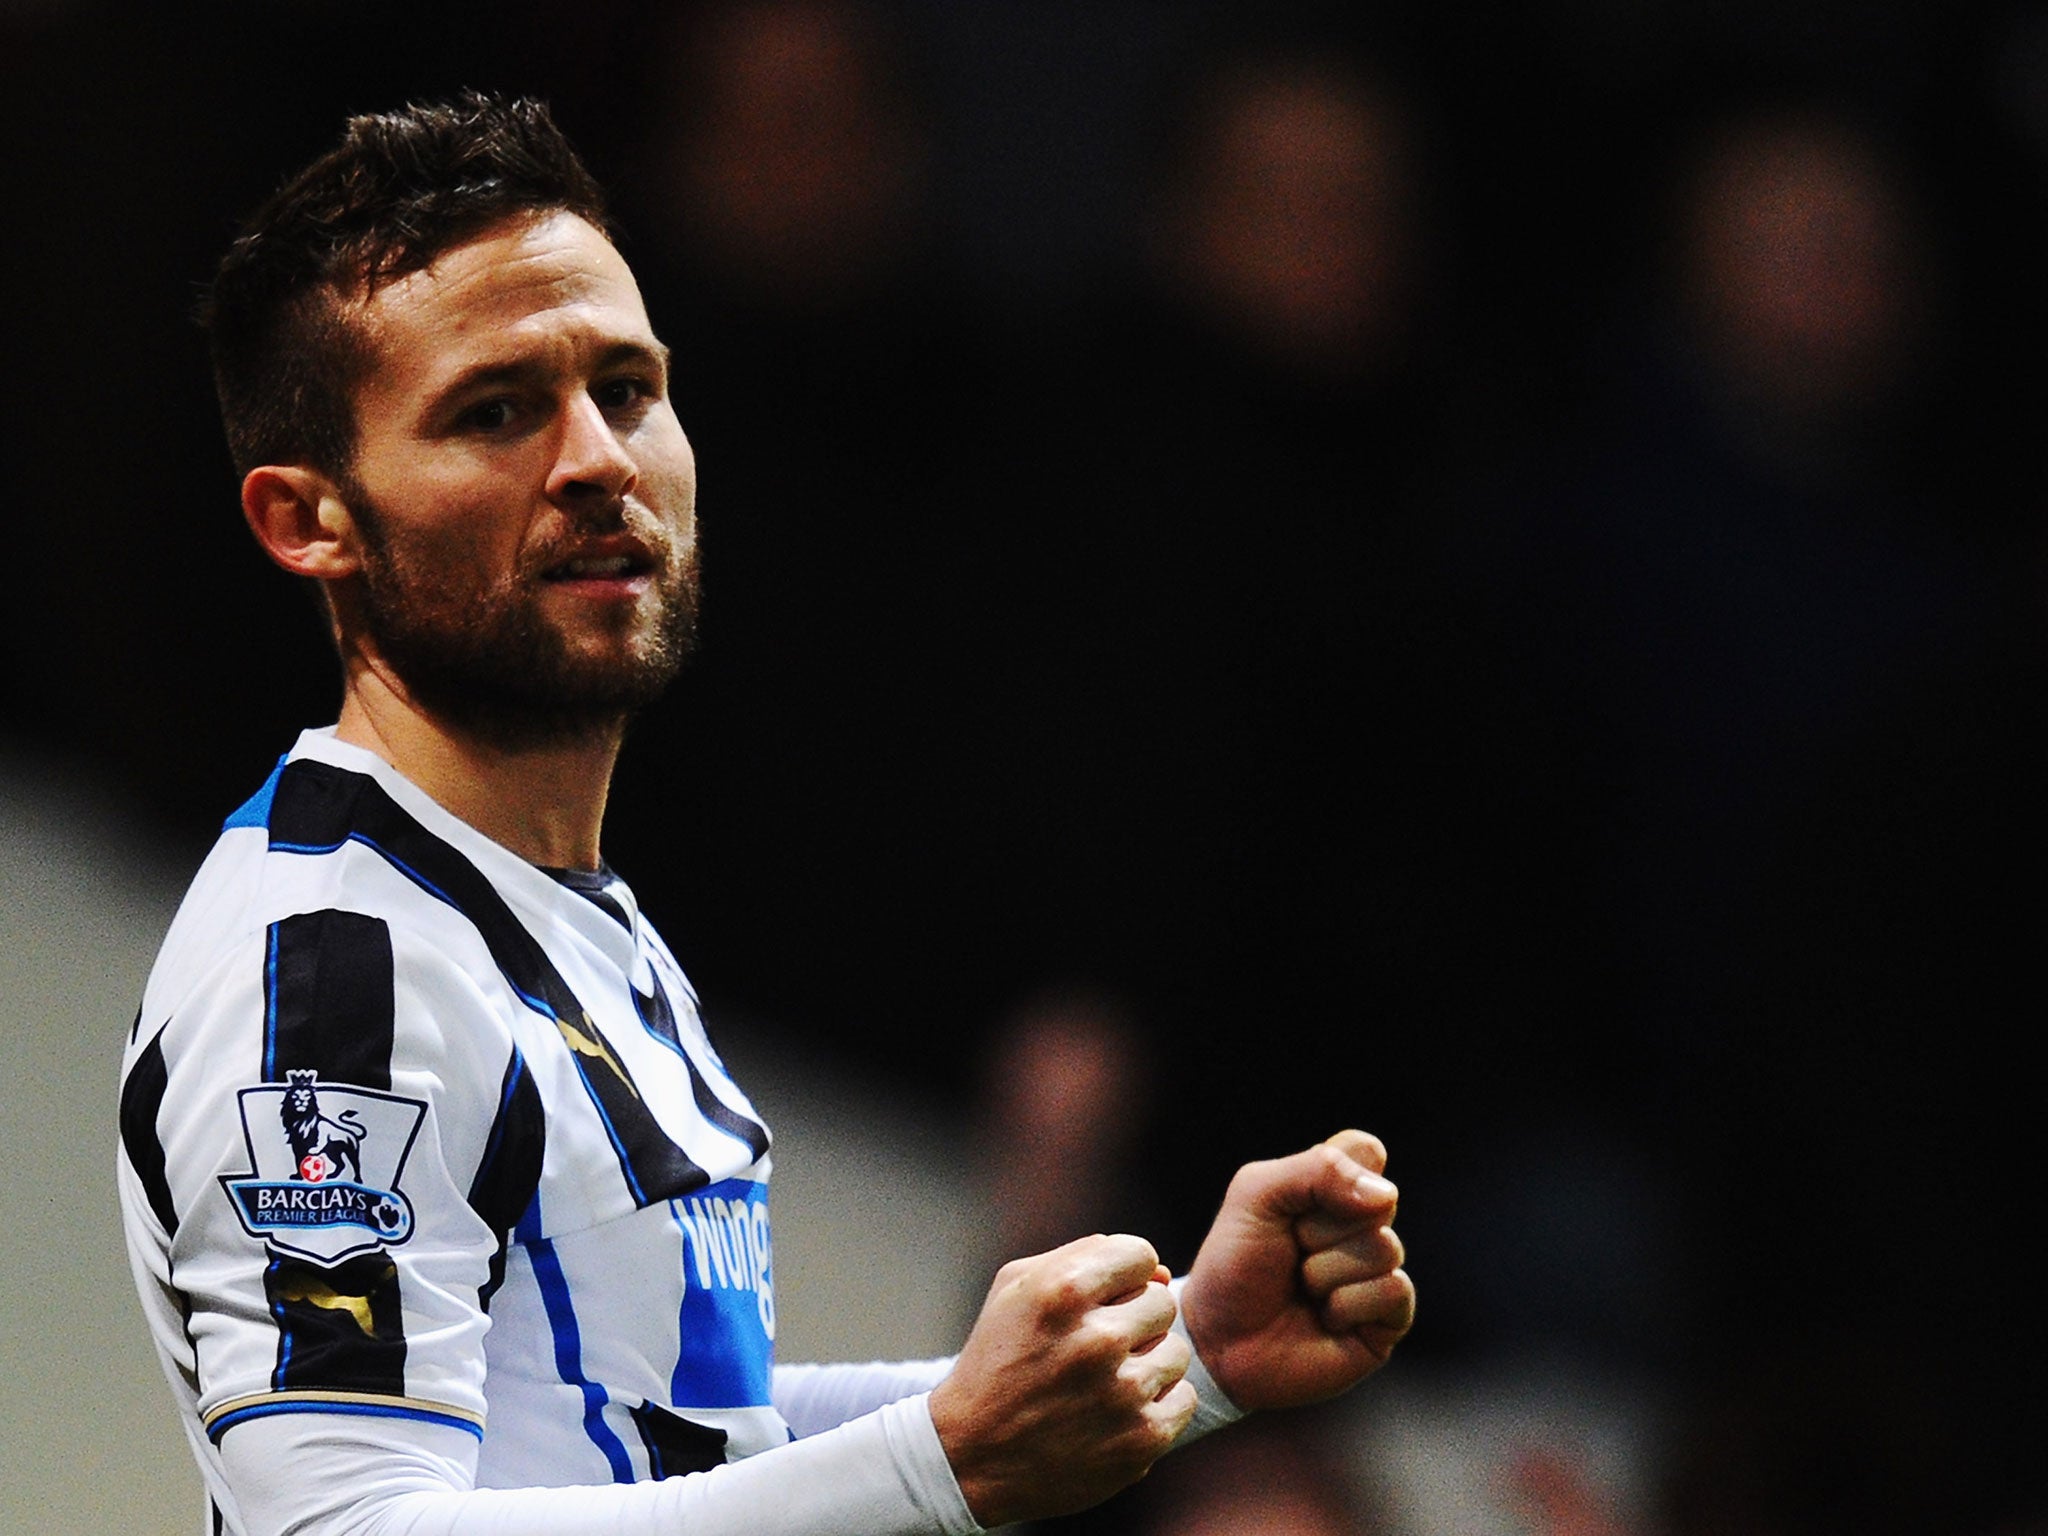 Carr pointed Newcastle in the direction of Yohan Cabaye